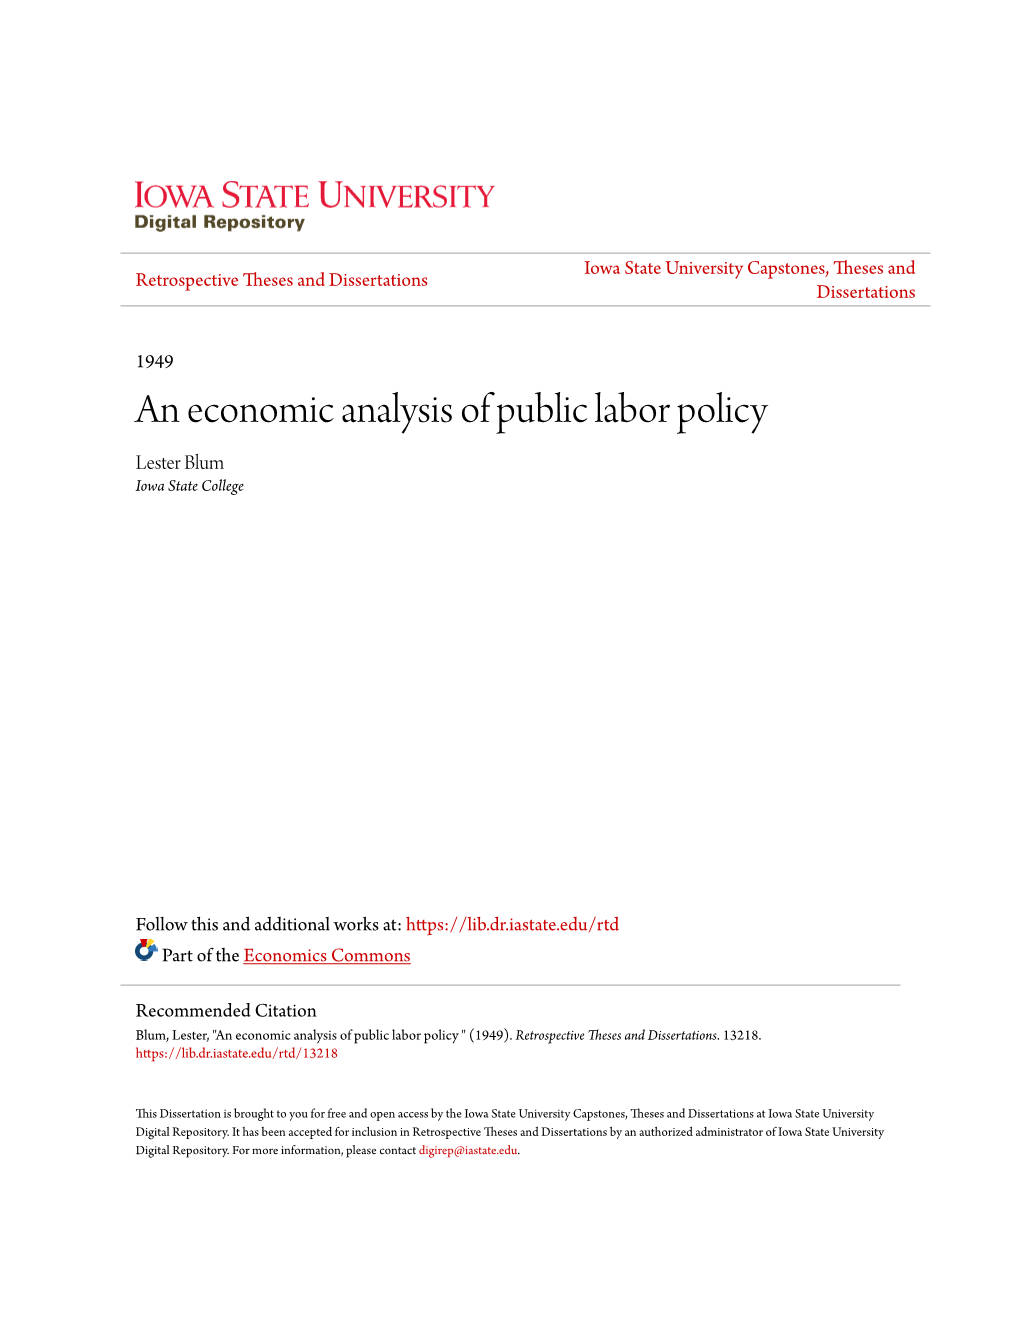 An Economic Analysis of Public Labor Policy Lester Blum Iowa State College